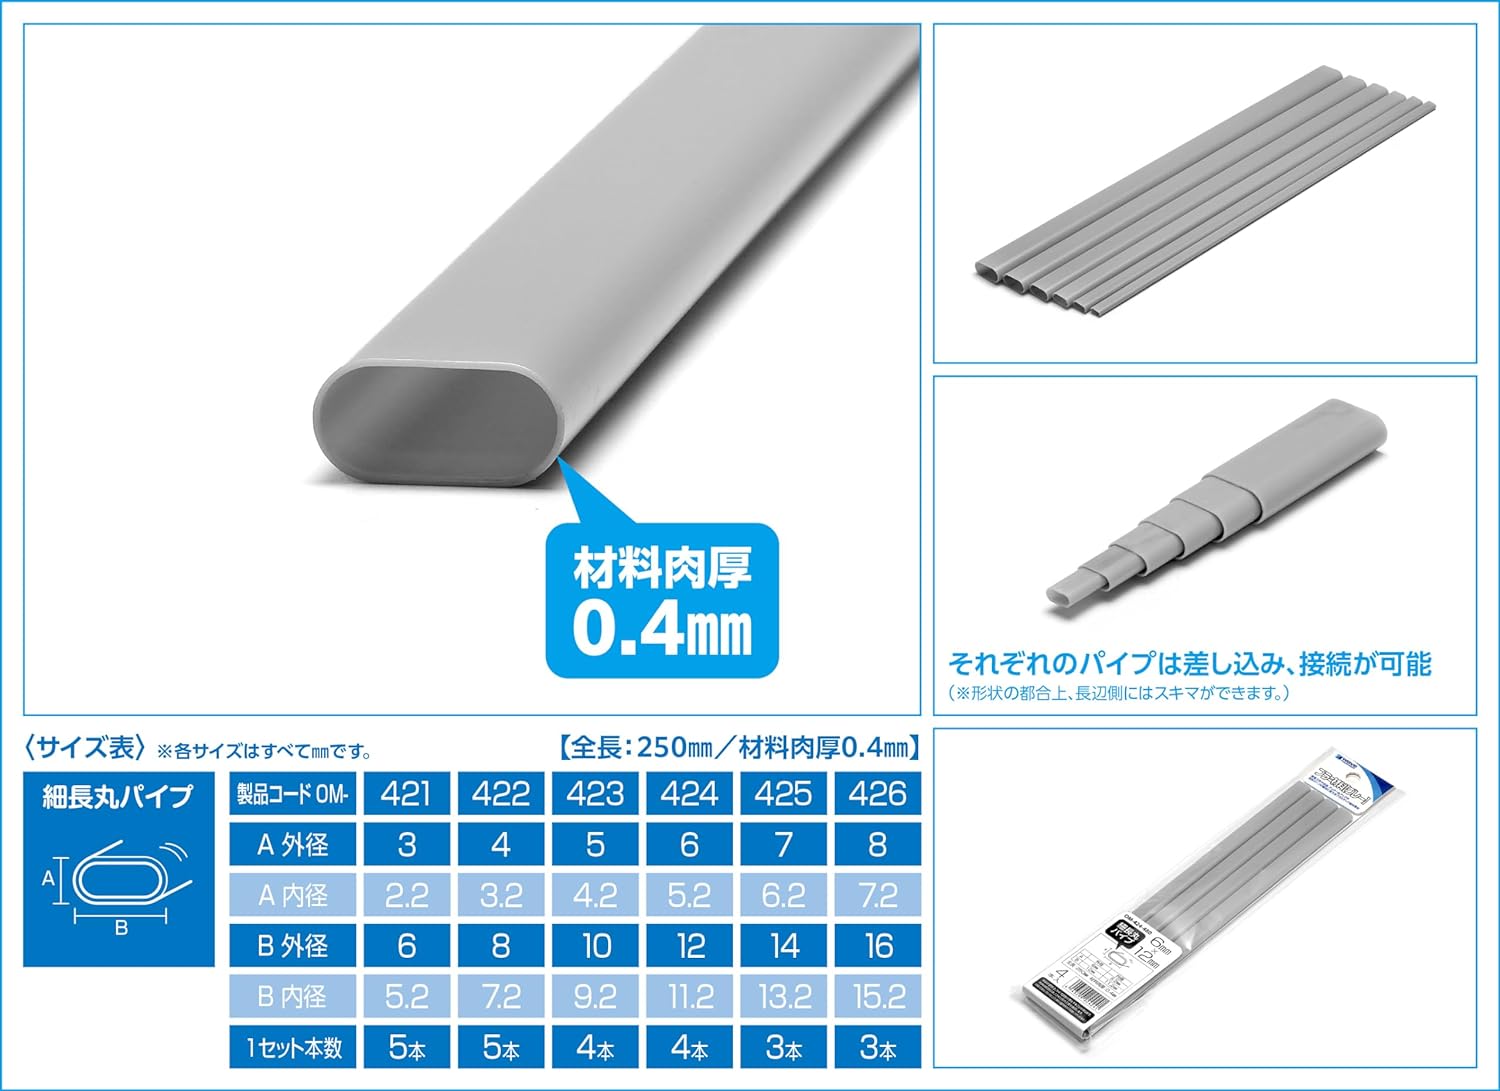 Wave OM-426 Plastic Material, Gray, Elongated Round Pipe, 0.3 x 0.6 inches (8 x 16 mm), 3 Pieces Material Series - BanzaiHobby